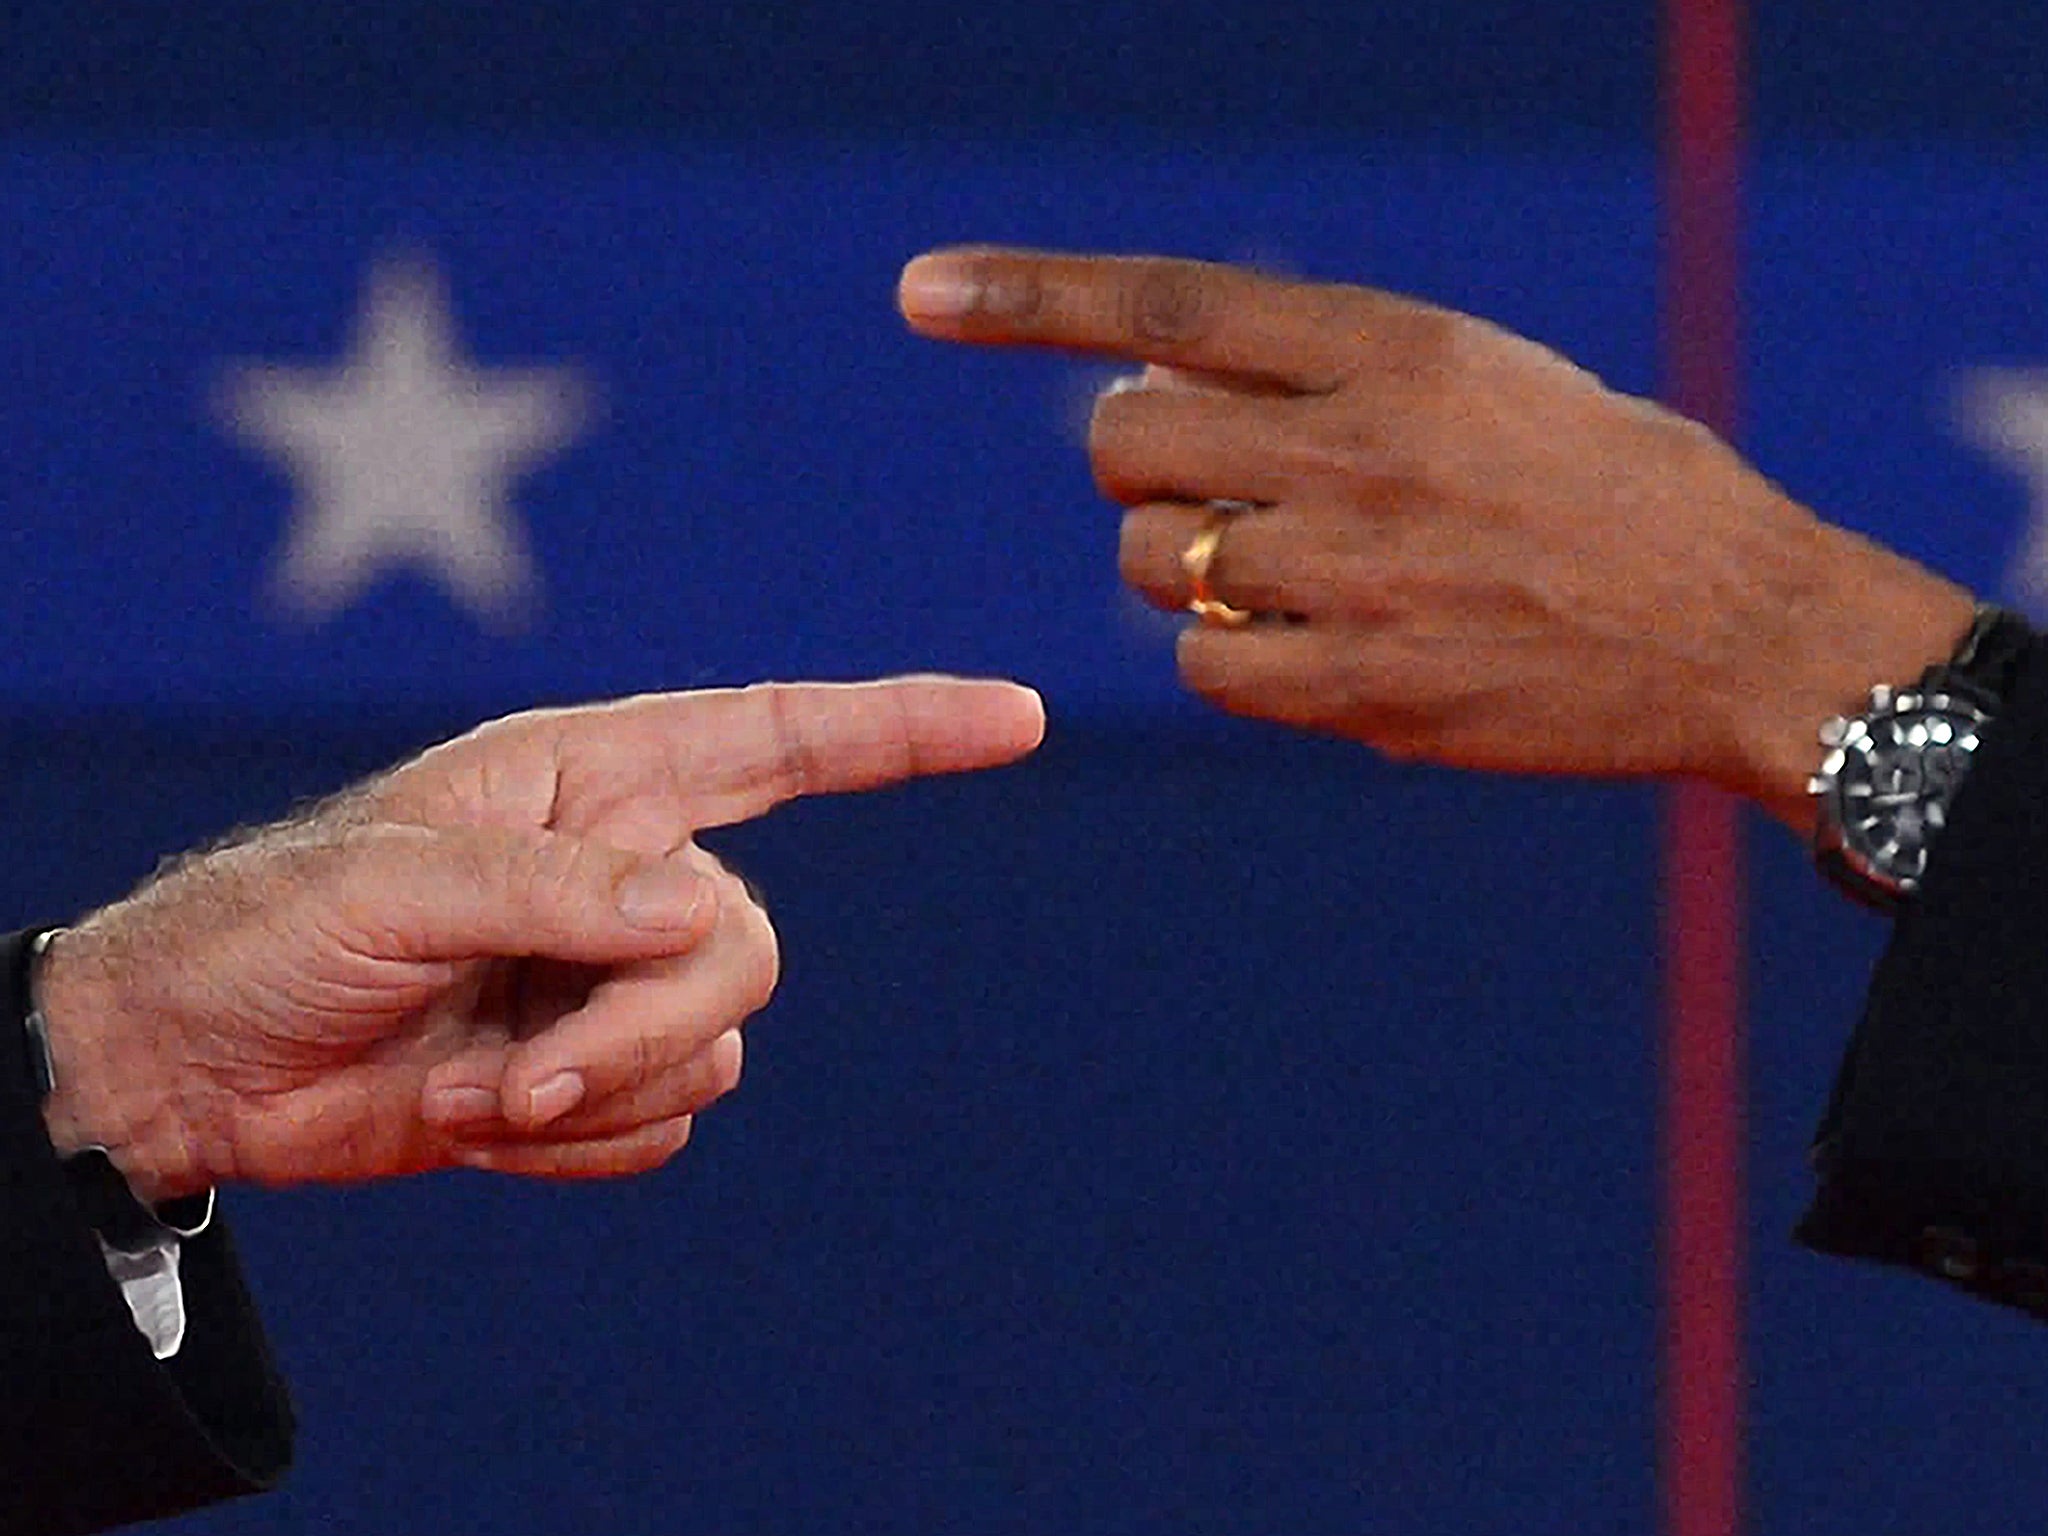 Get the point? Romney and Obama in the second presidential debate